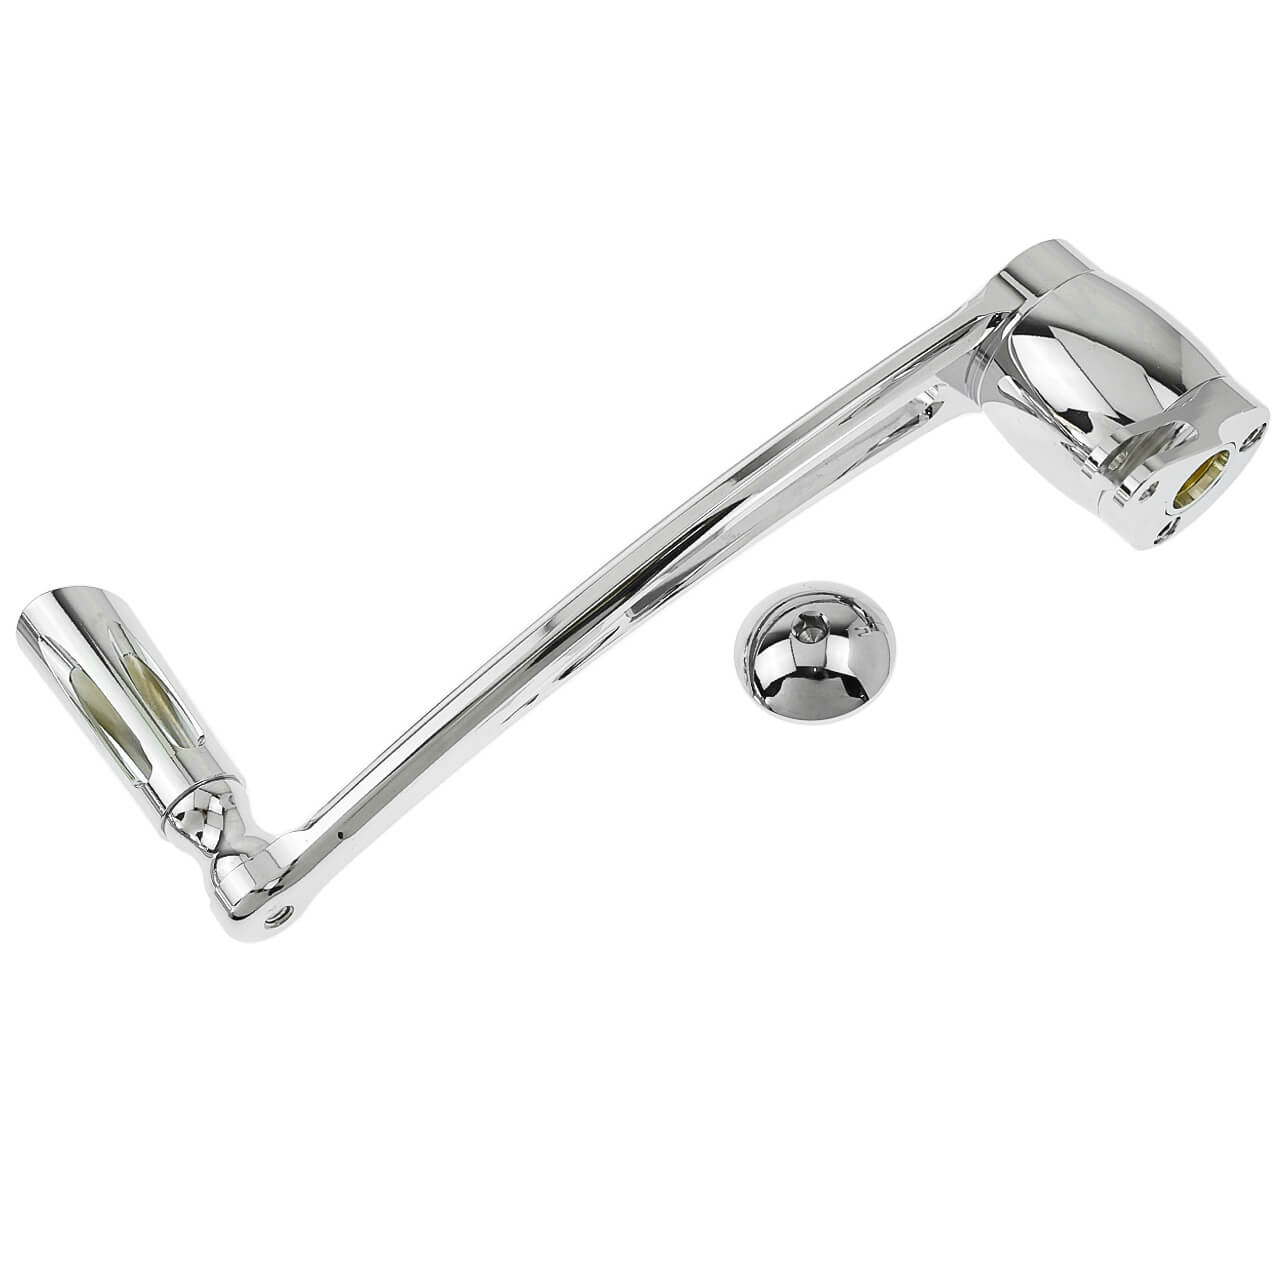 PE003201-mactions-brake-arm-lever-for-harley-touring